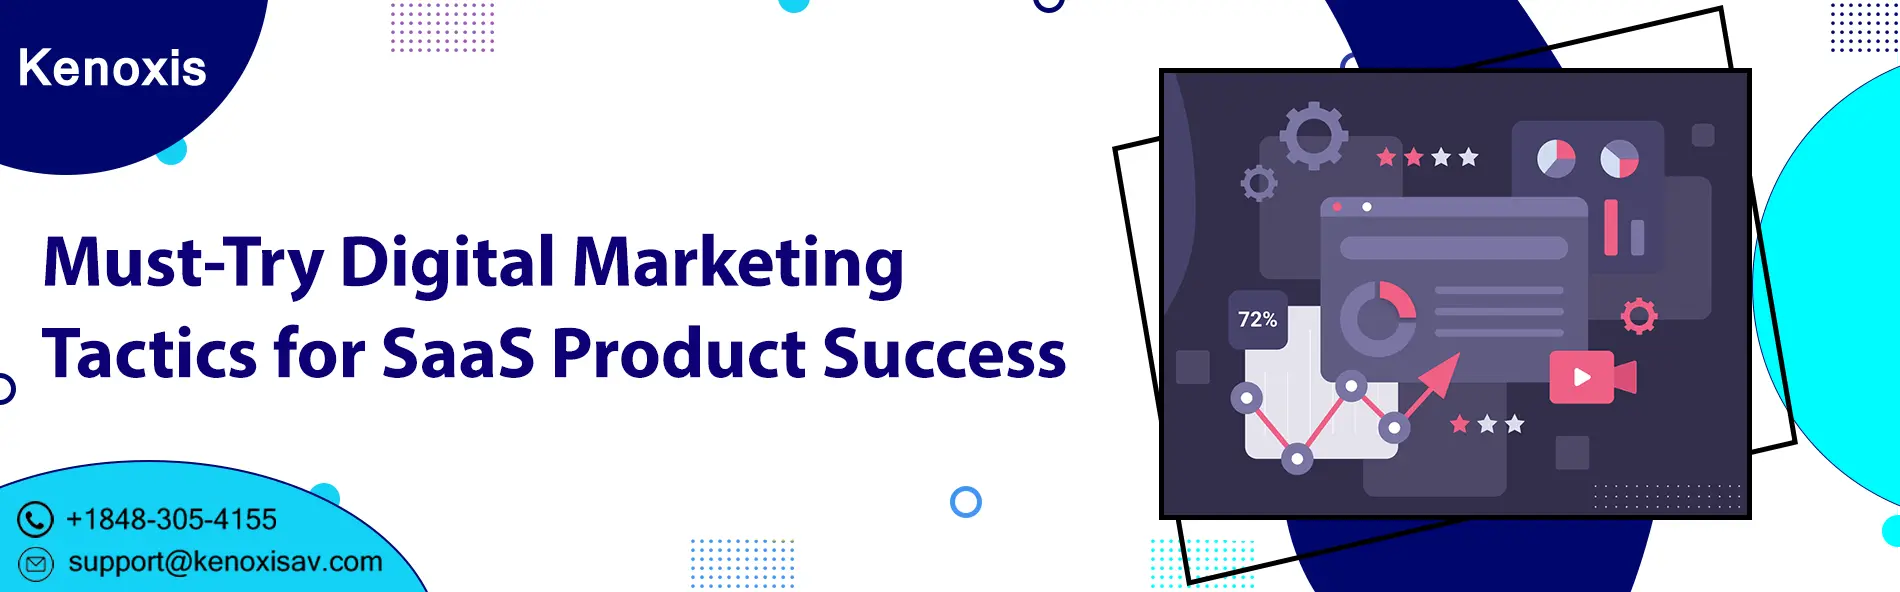 Must-Try Digital Marketing Tactics for SaaS Product Success